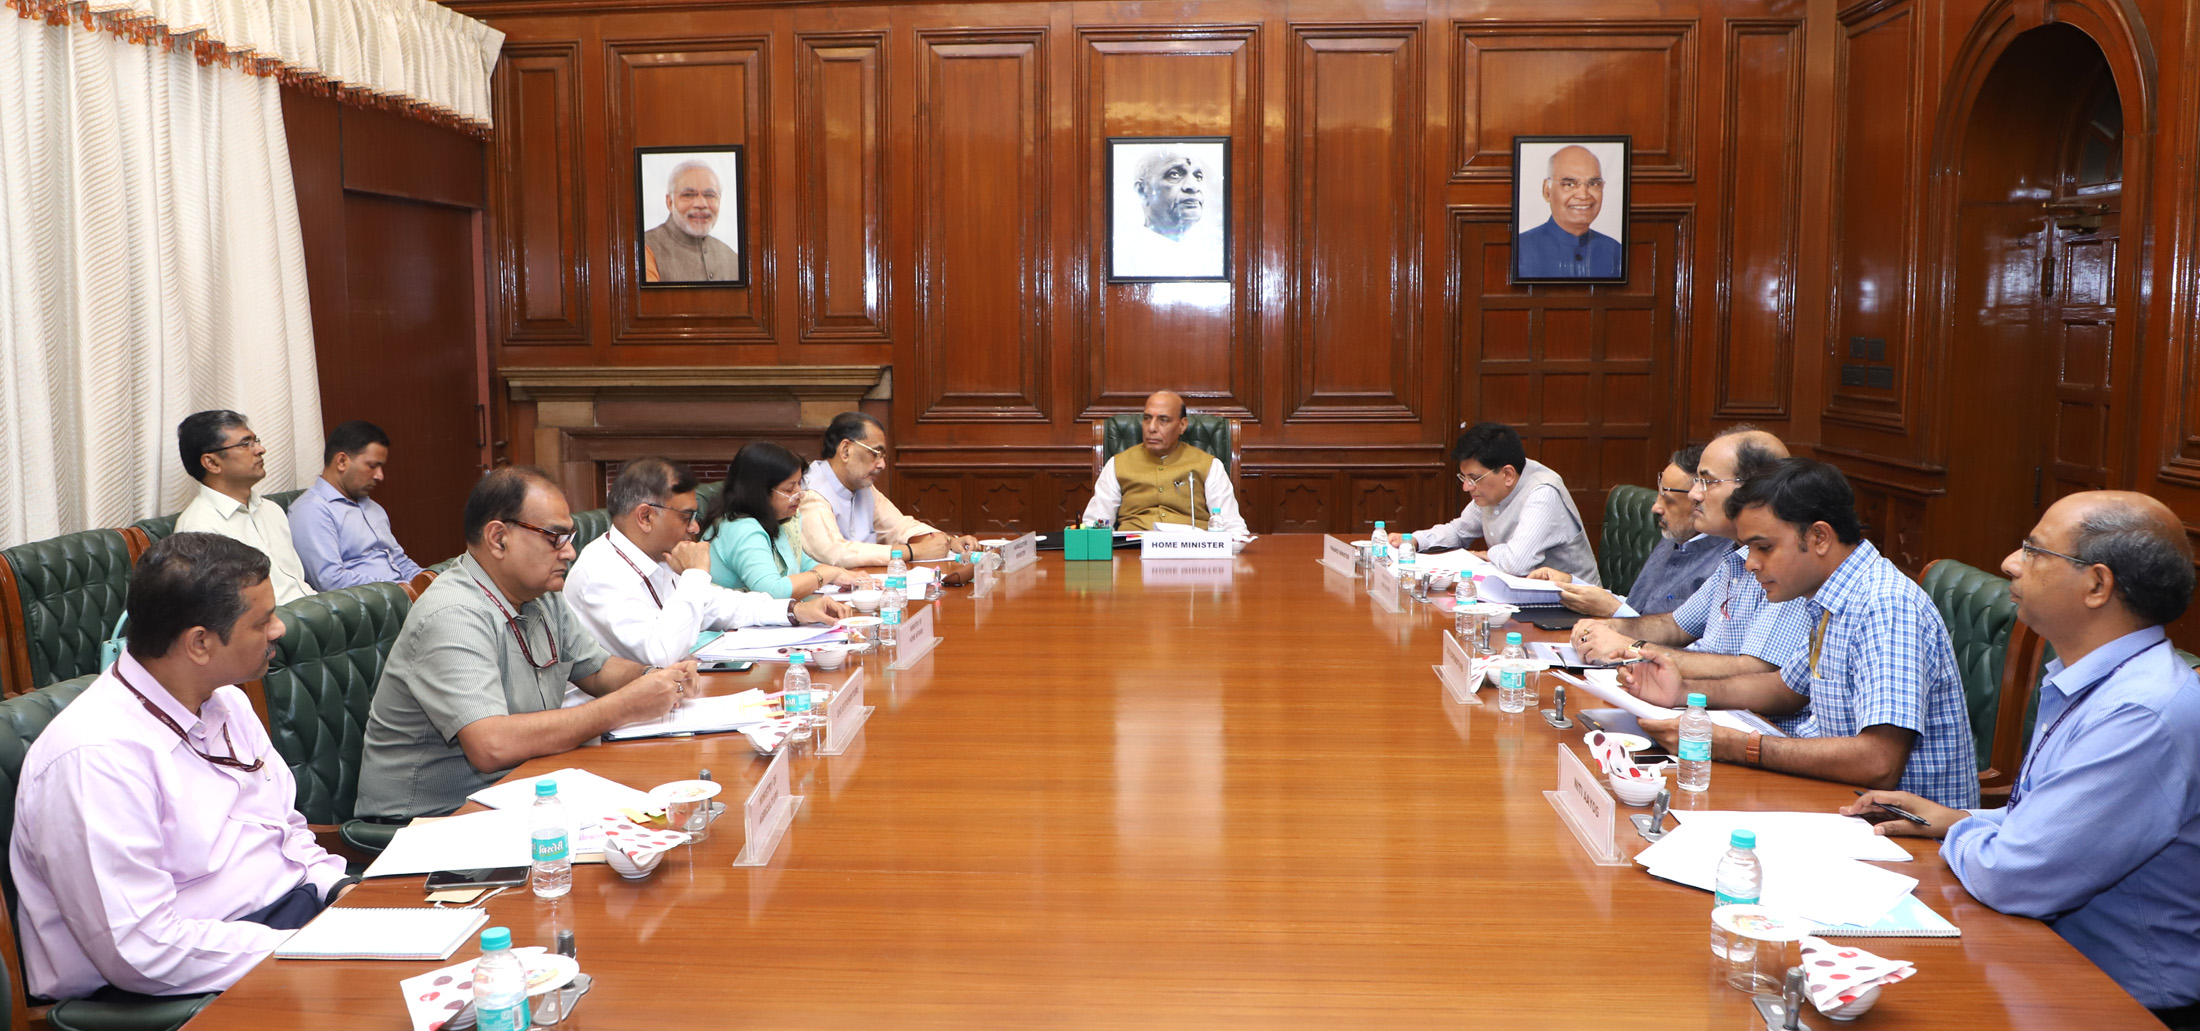 The Union Home Minister, Shri Rajnath Singh chairing a meeting of the High Level Committee (HLC) for Central Assistance to the states of Andhra Pradesh, Arunachal Pradesh and Nagaland, in New Delhi on June 29, 2018. The Union Minister for Agriculture and Farmers Welfare, Shri Radha Mohan Singh, the Union Minister for Railways, Coal, Finance and Corporate Affairs, Shri Piyush Goyal, the Union Home Secretary, Shri Rajiv Gauba and senior officers of the Ministries of Home Affairs, Finance and Agriculture and NITI Aayog are also seen.